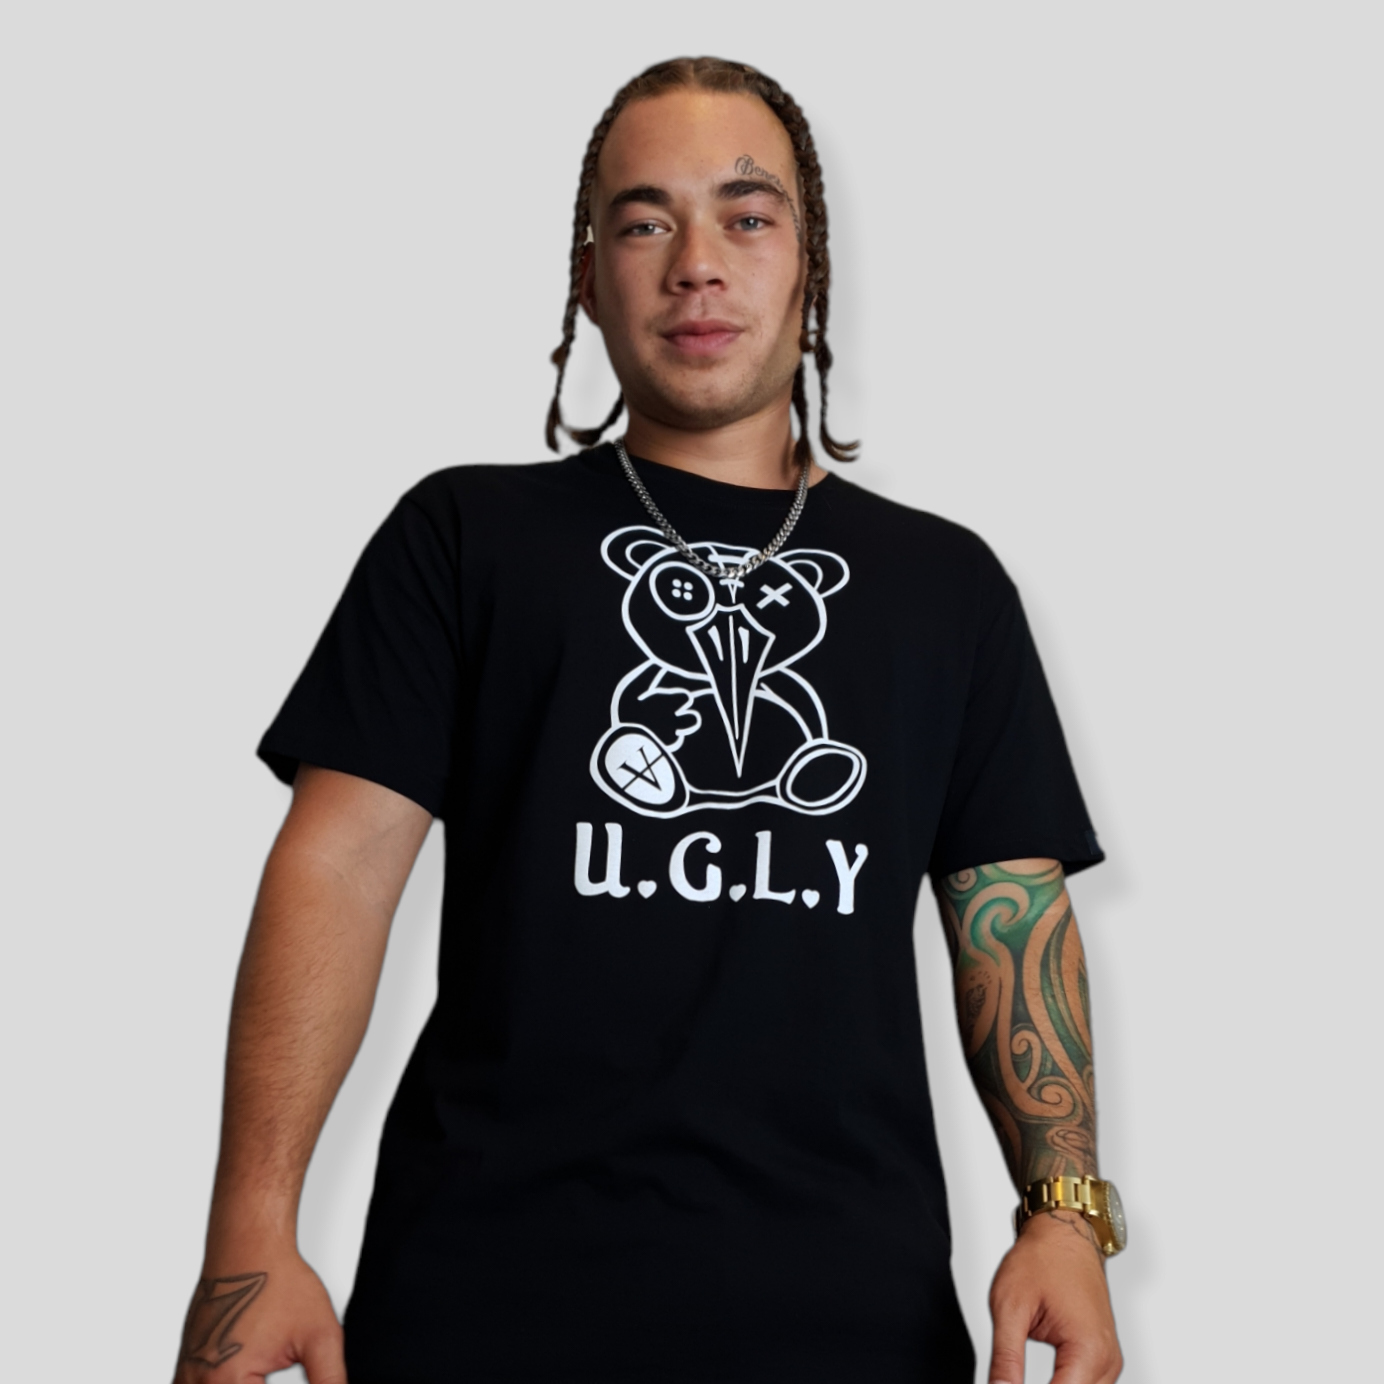 Mens UGLY T Shirt Black With White Print